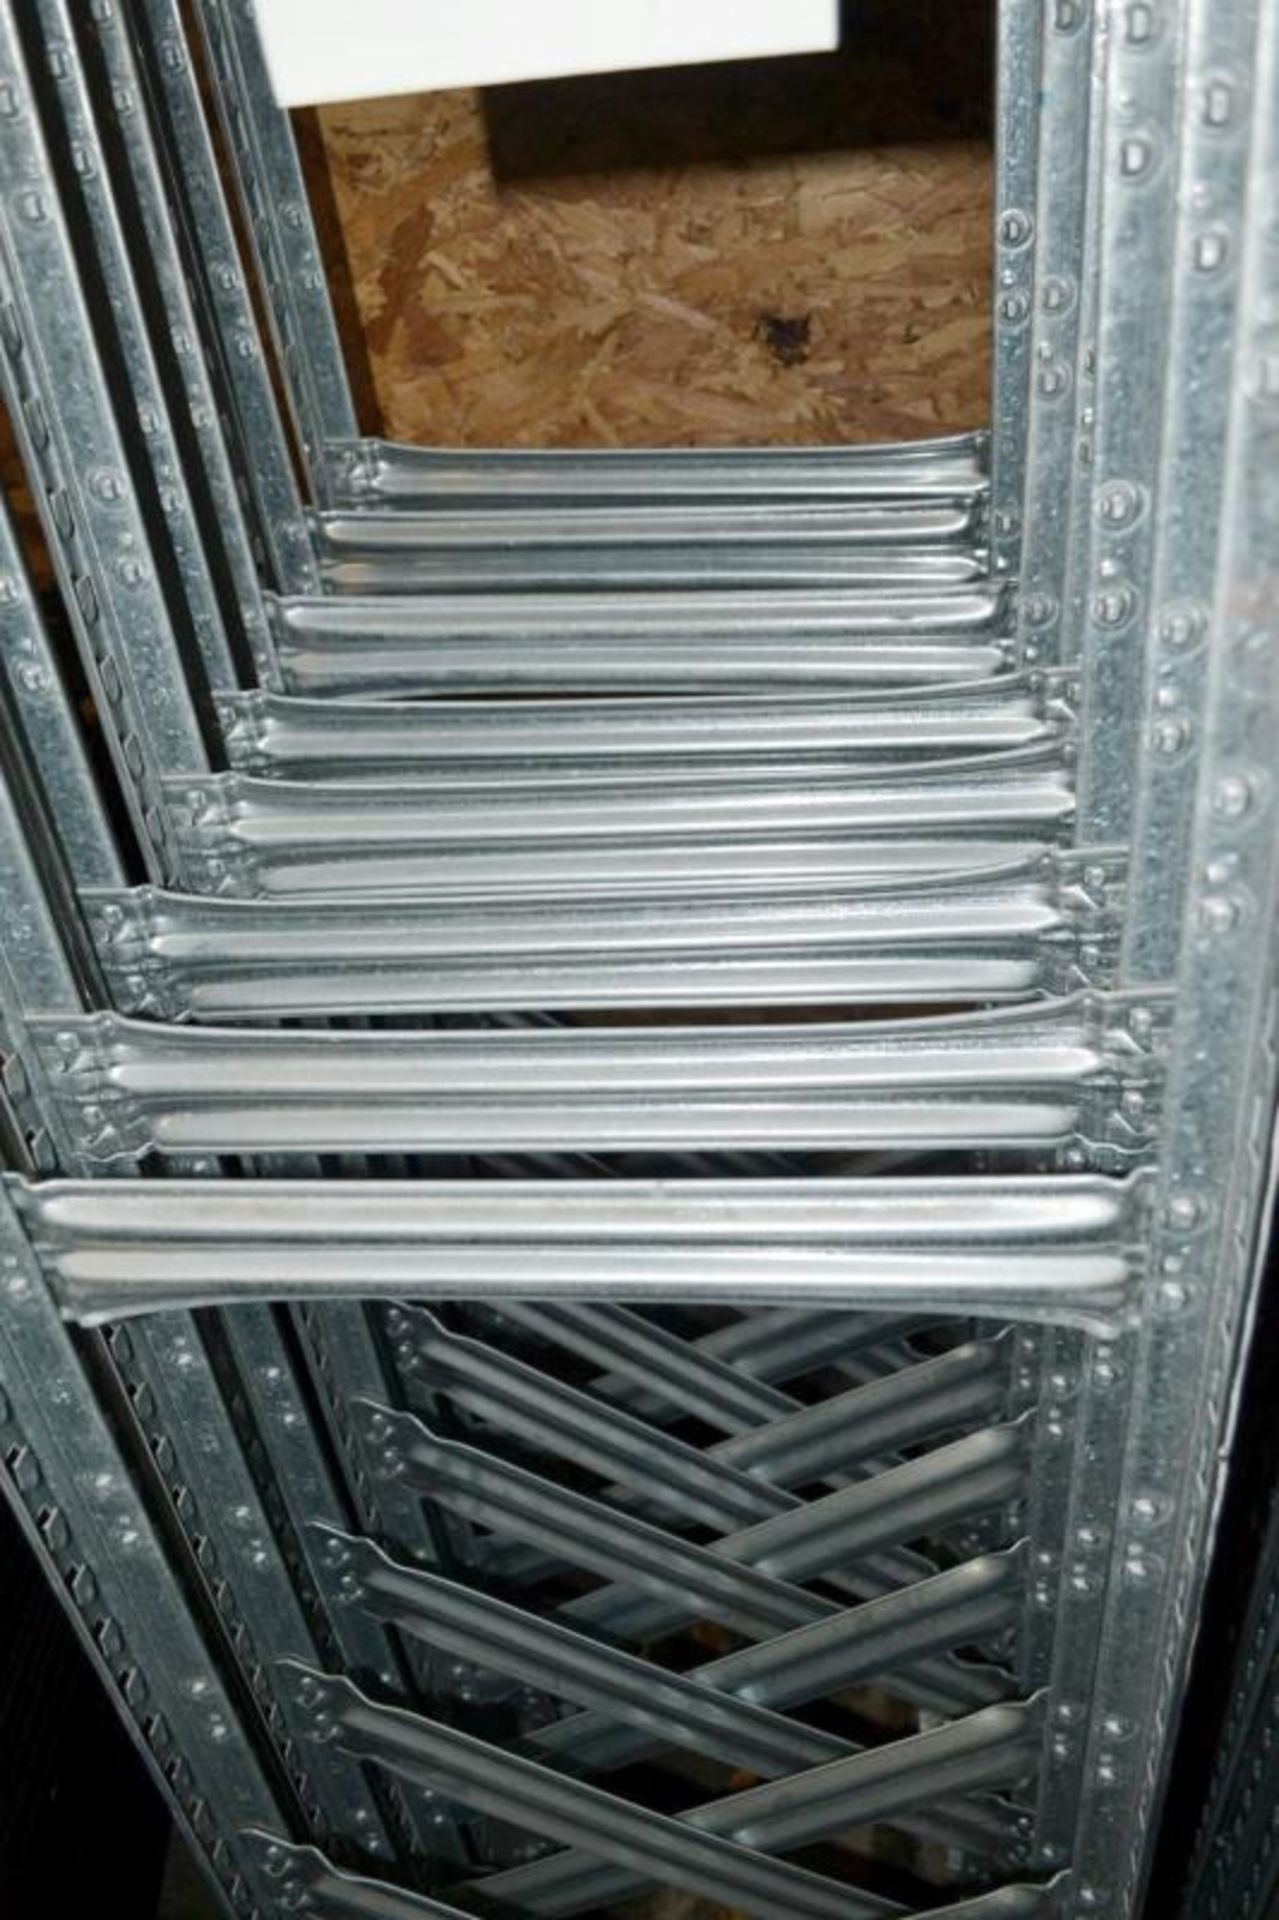 9 x Bays of Metalsistem Steel Modular Storage Shelving - Includes 29 Pieces - Recently Removed - Image 7 of 16